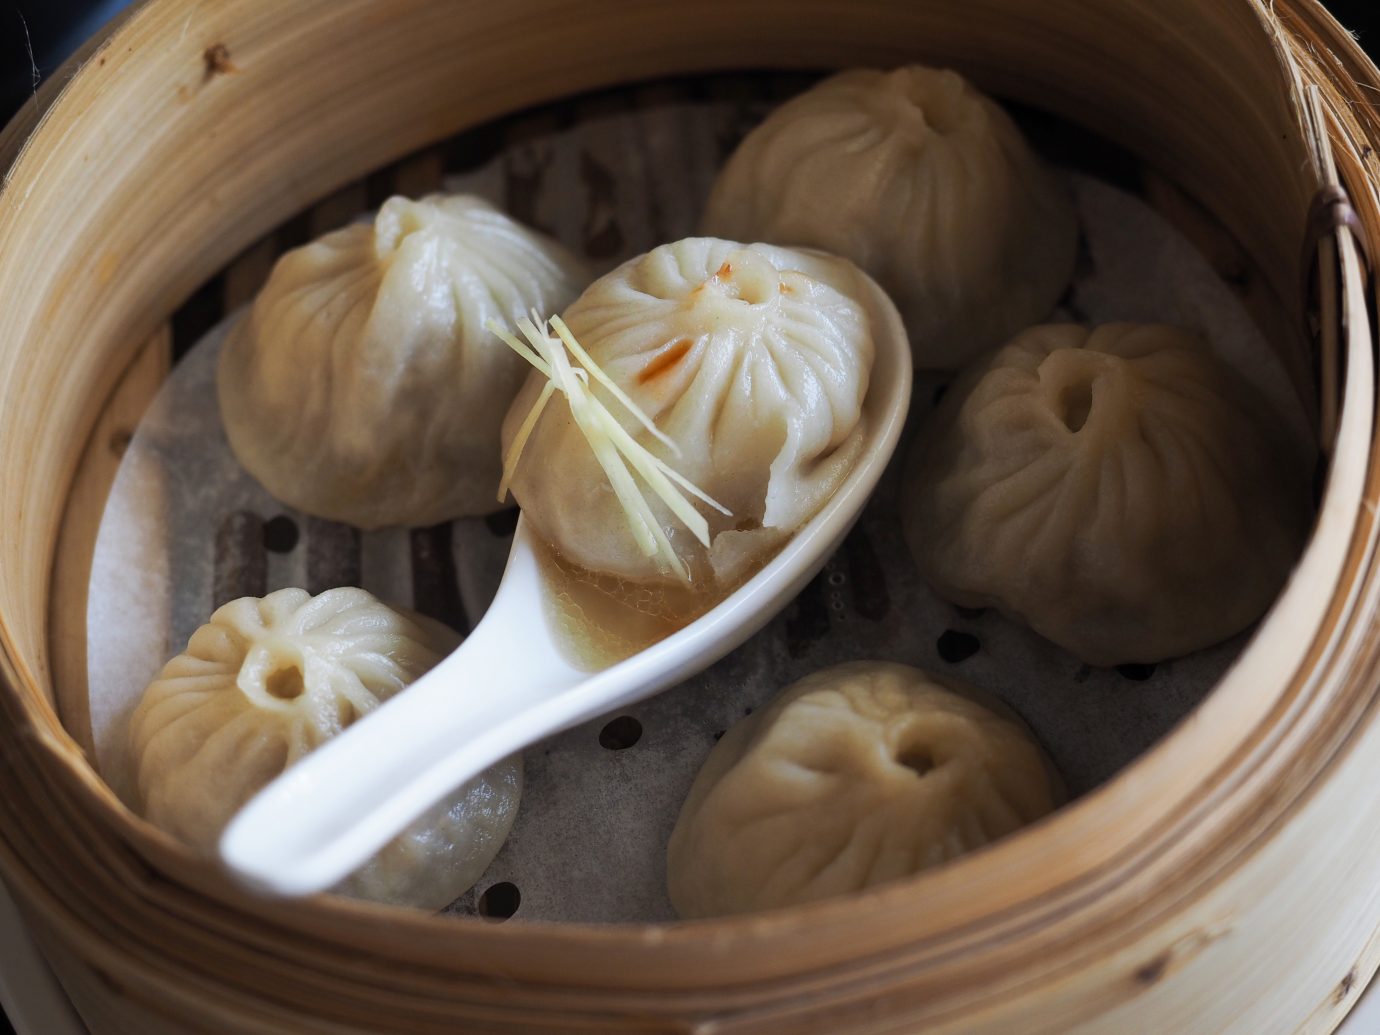 Soup Dumplings from China Live in San Francisco